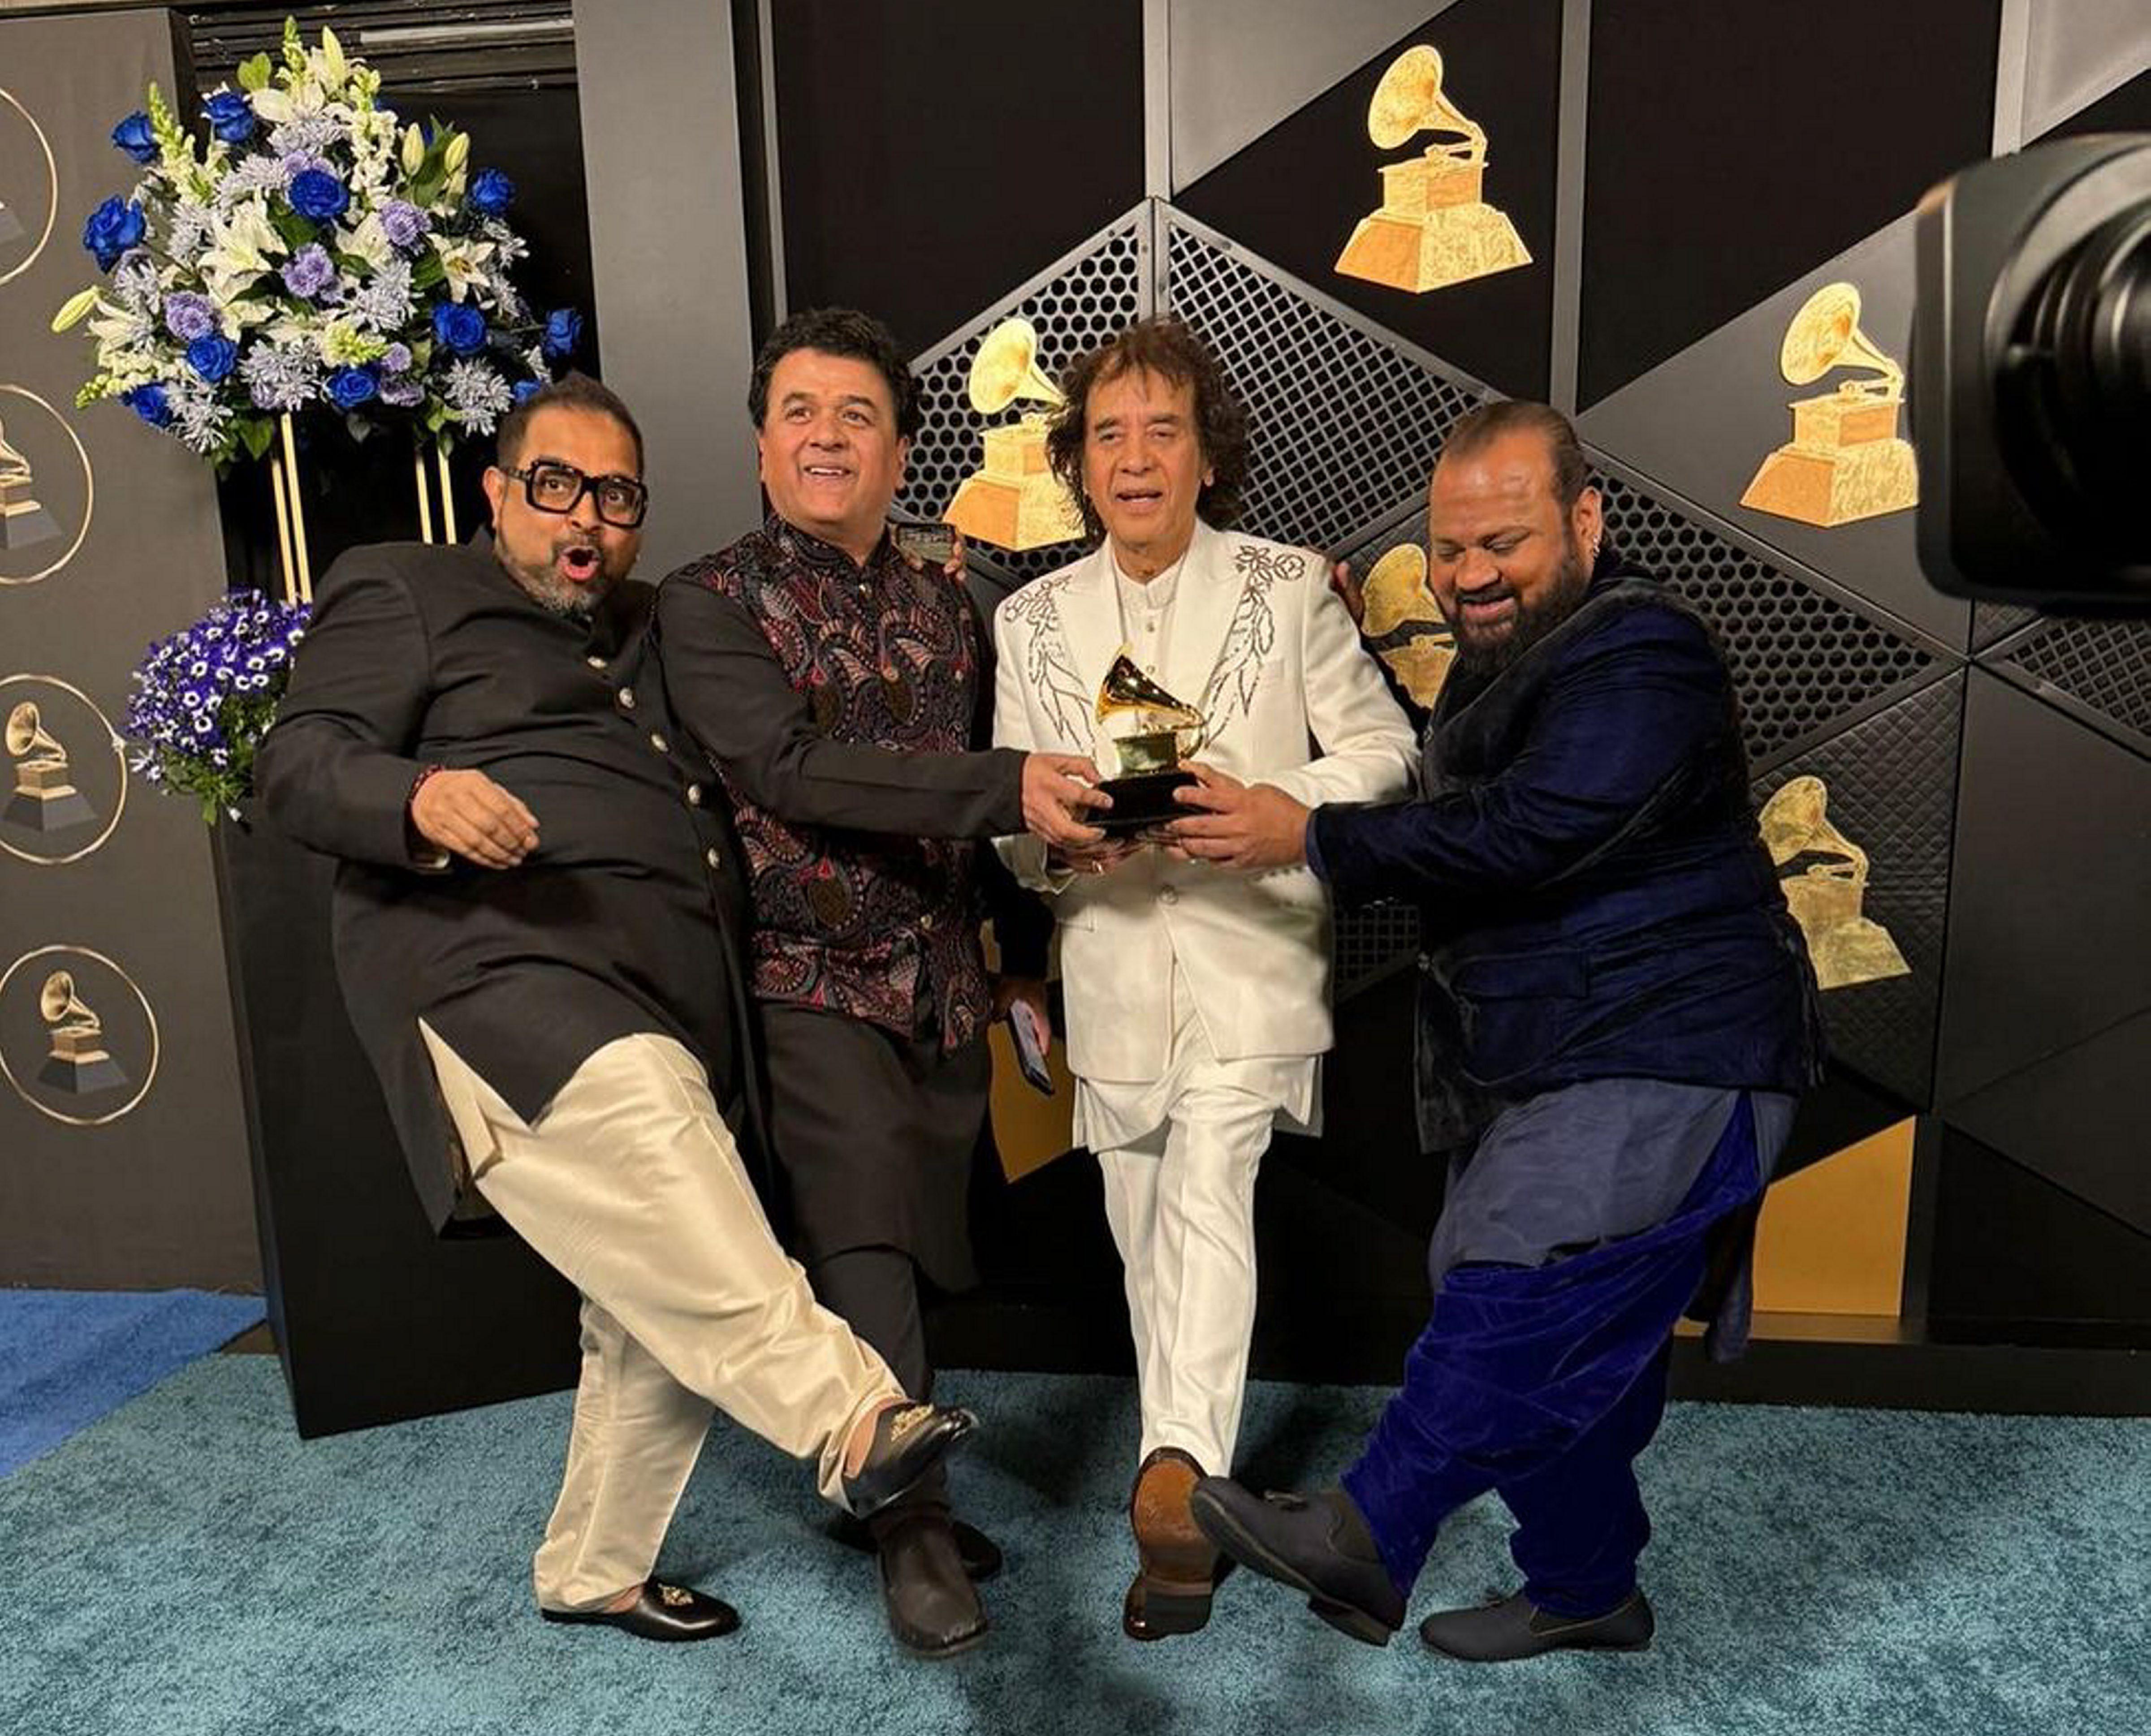 While Zakir Hussain was India's big winner with three Grammys, Rakesh Chaurasia picked up two. Singer Shankar Mahadevan, violinist Ganesh Rajagopalan and percussionist Selvaganesh Vinayakram, Hussain's collaborators in the fusion group Shakti, won one Grammy each at the event held at the Crypto.com Arena Sunday night. (Photo: PTI)